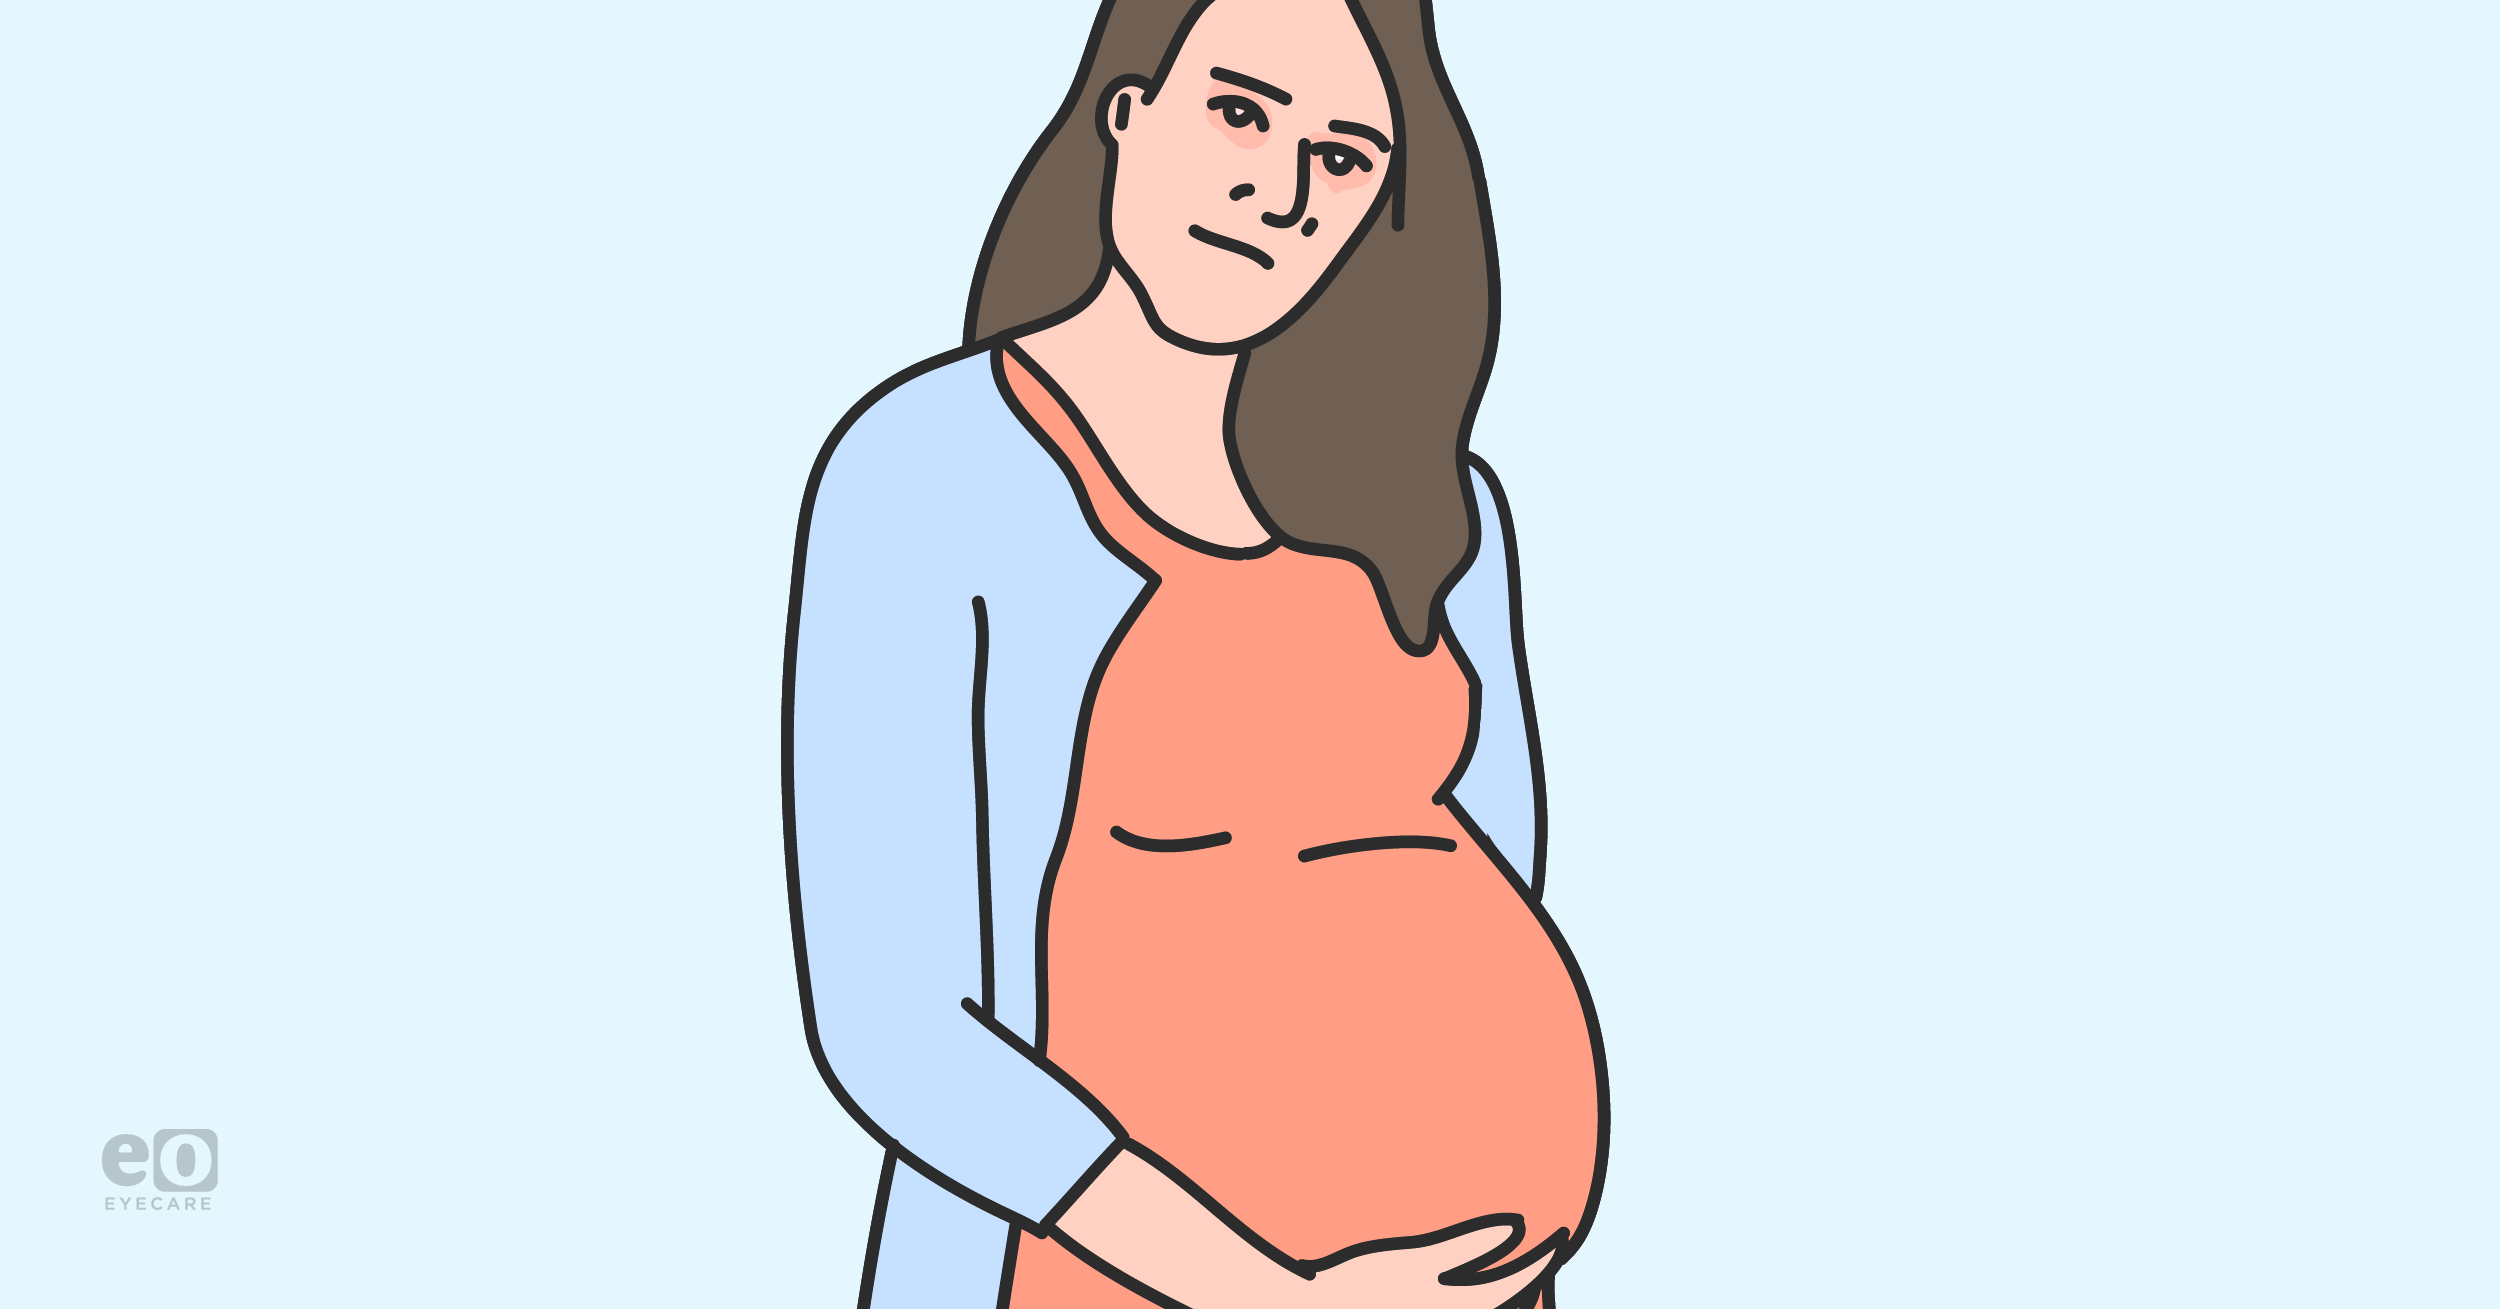 A Quick Guide to Dry Eye During Pregnancy